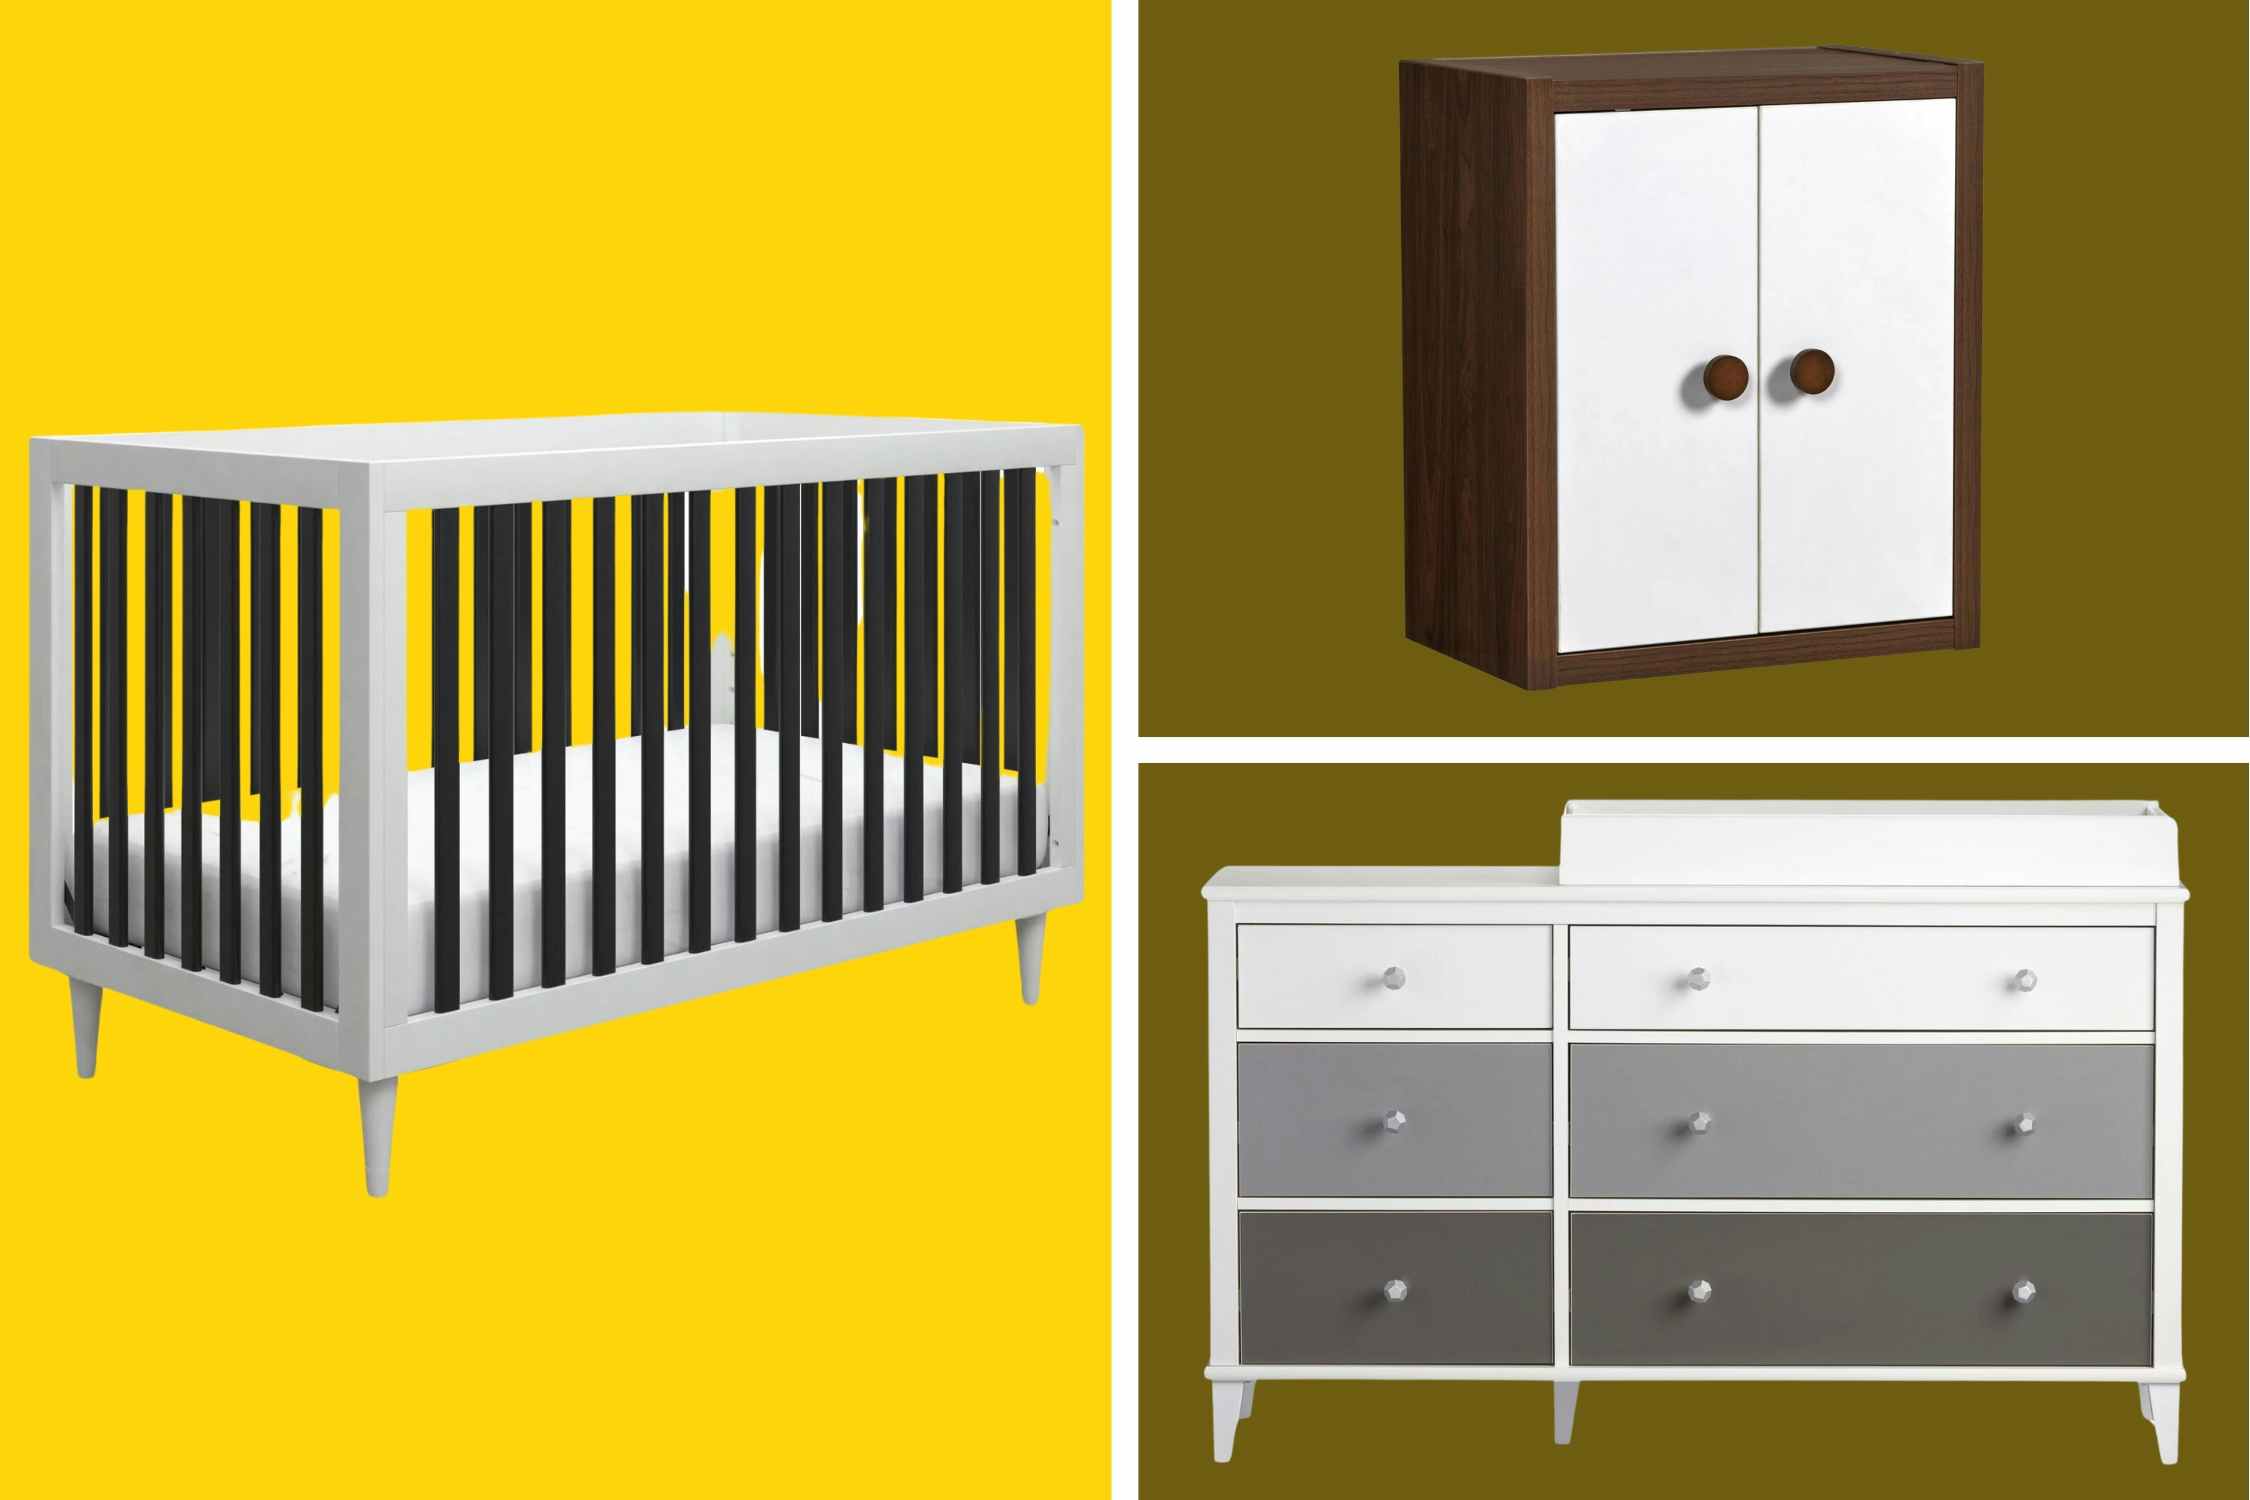 Furniture for Kids’ Bedrooms and Baby Nurseries, From $35 at Walmart